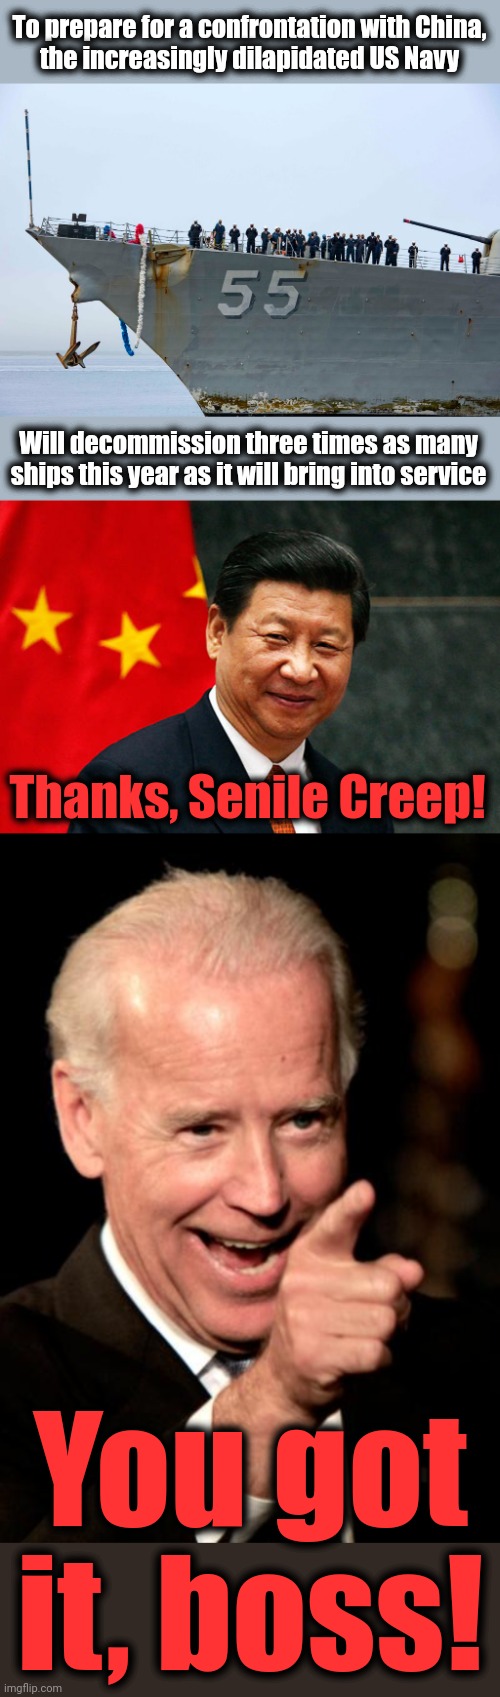 The Senile Creep: bought and paid for | To prepare for a confrontation with China,
the increasingly dilapidated US Navy; Will decommission three times as many ships this year as it will bring into service; Thanks, Senile Creep! You got it, boss! | image tagged in xi jinping,memes,smilin biden,us navy,ships,china | made w/ Imgflip meme maker